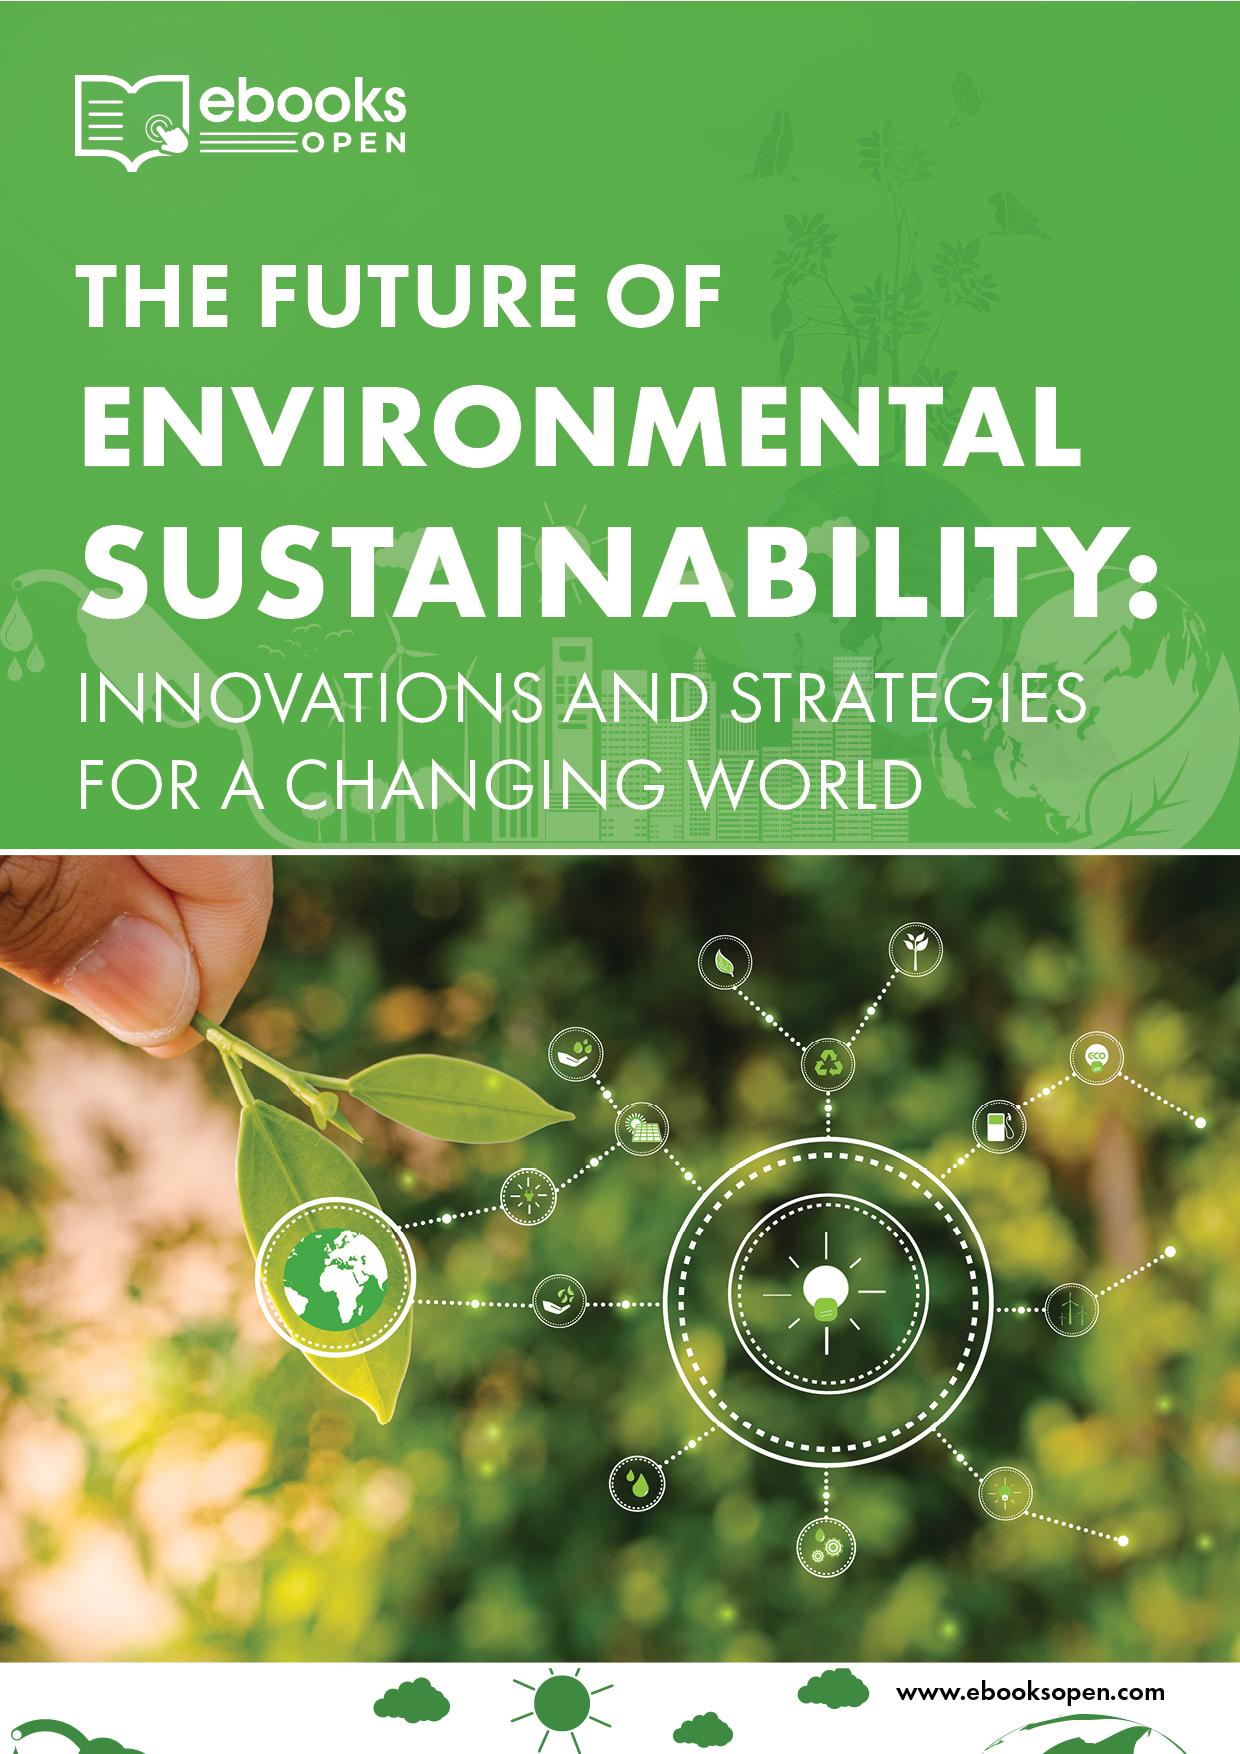 The Future of Environmental Sustainability: Innovations and Strategies for a Changing World